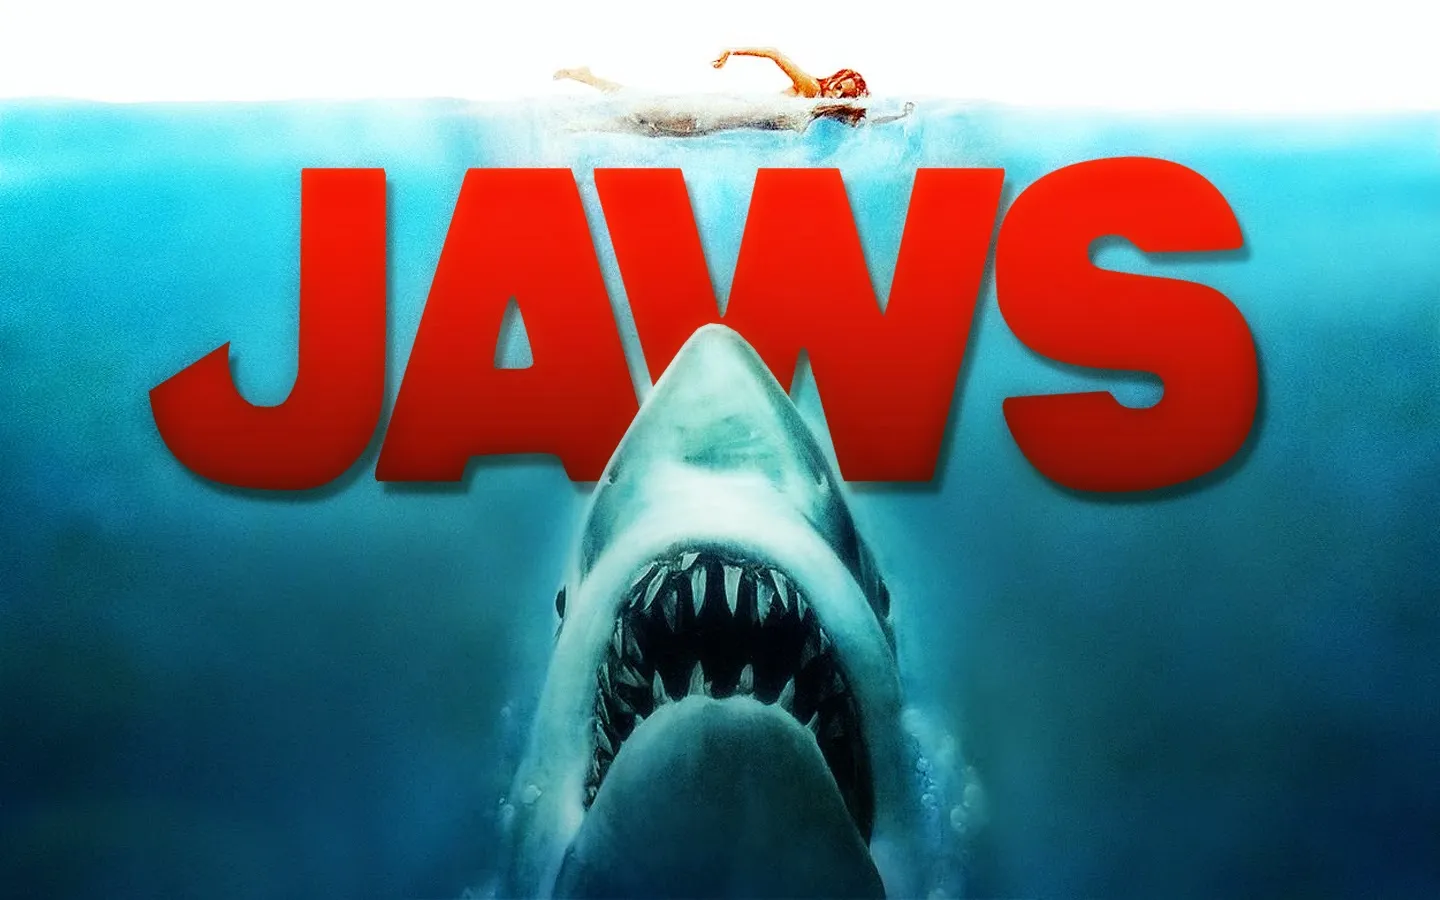 The official logo of the shark film Jaws